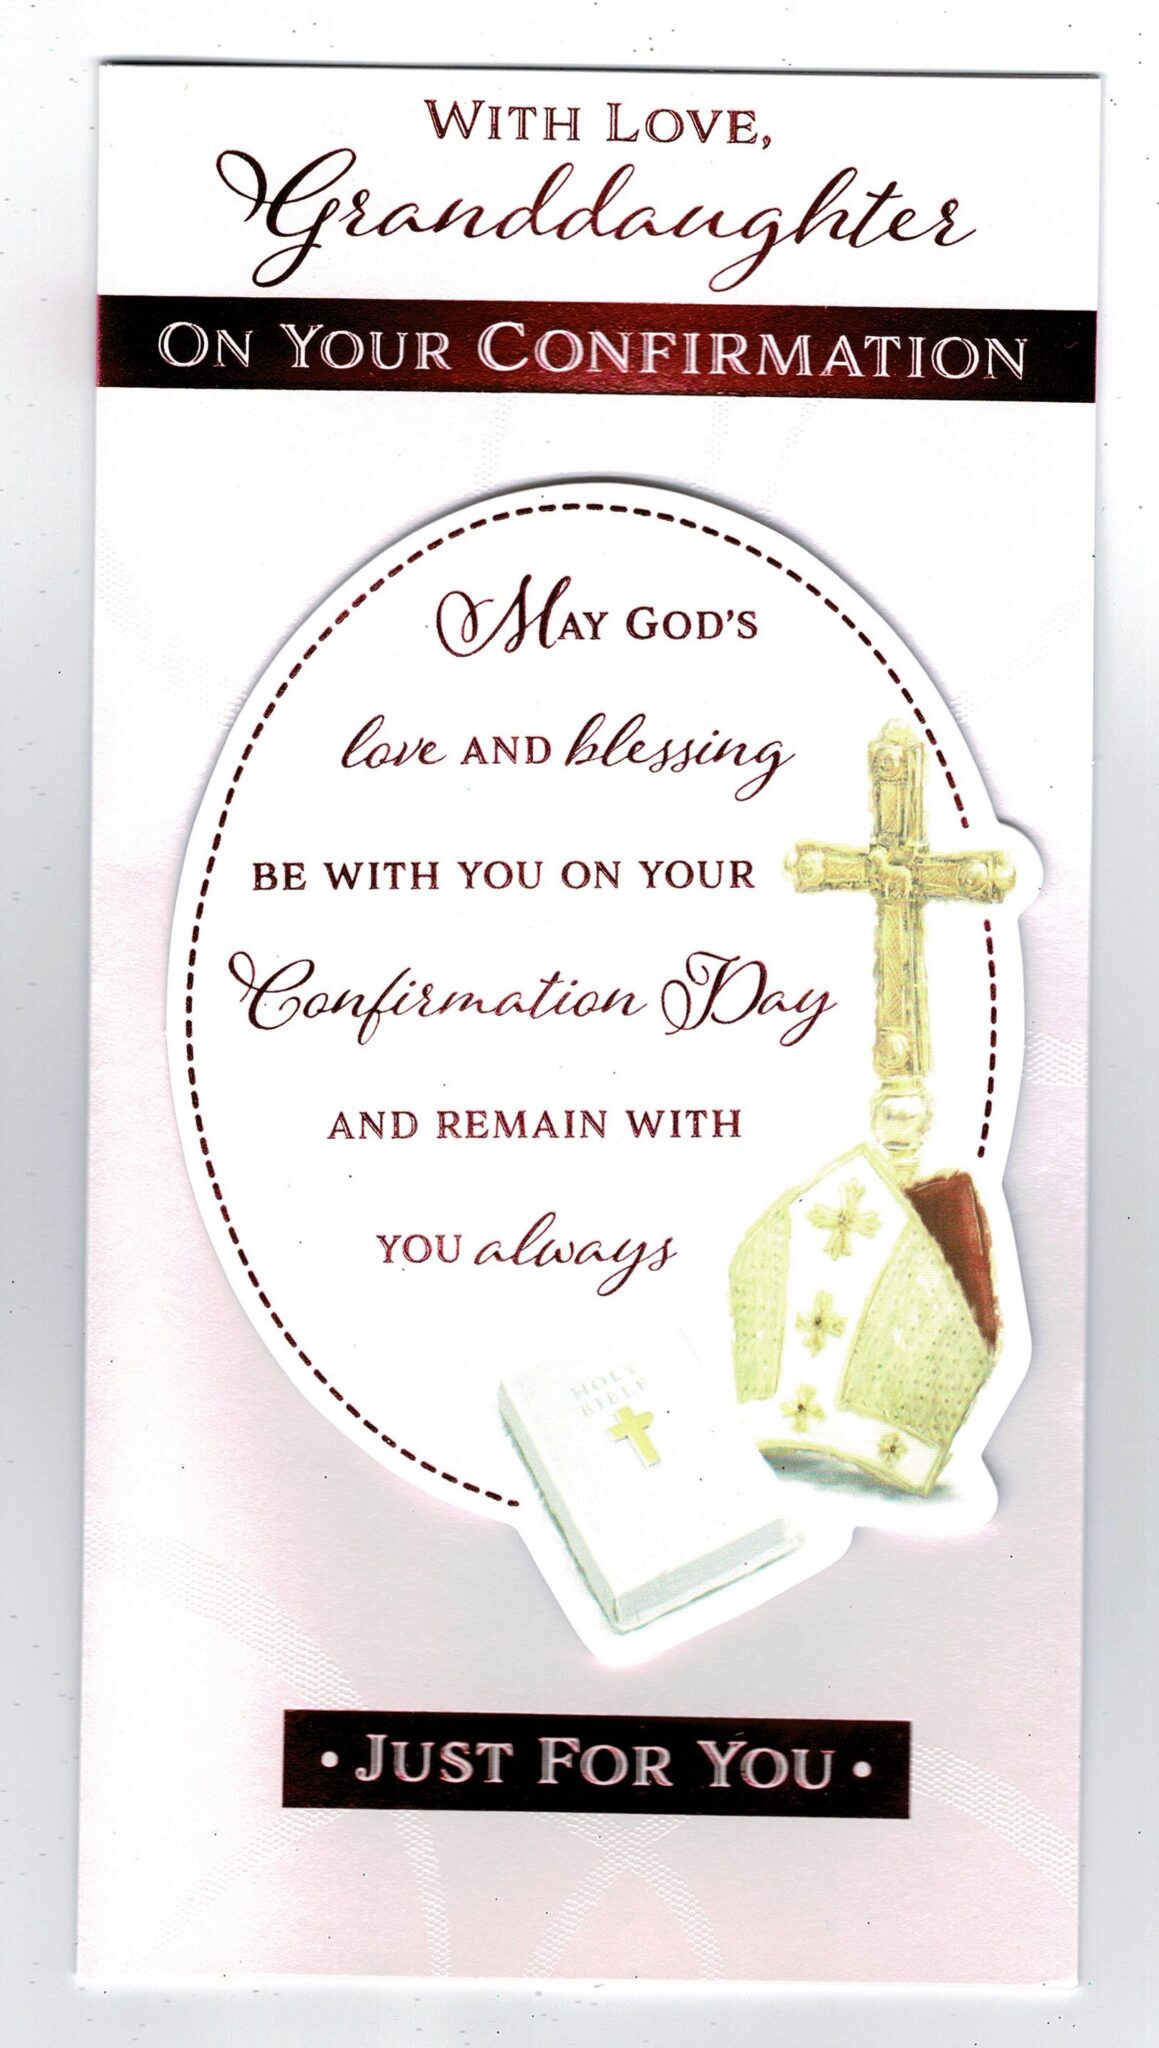 granddaughter-confirmation-card-with-love-granddaughter-on-your